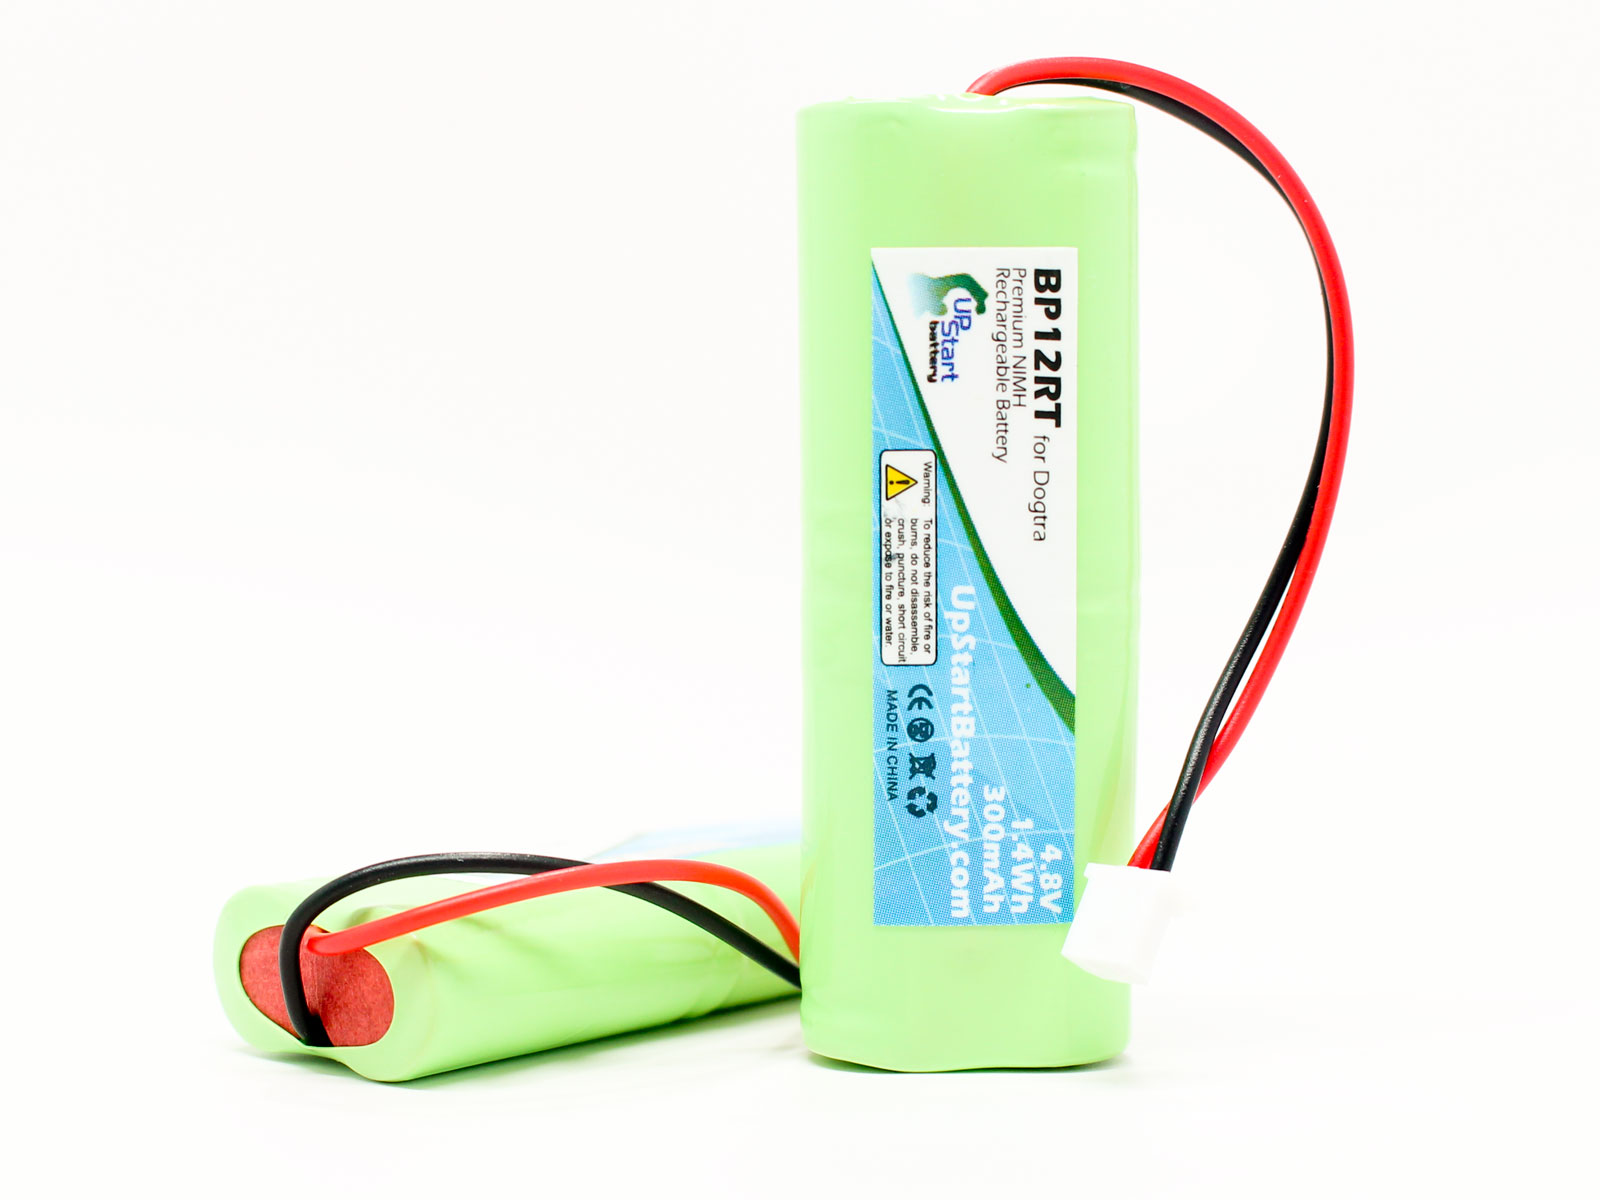 Dogtra 1700 NCP Battery 300mAh, 4.8V, NI-MH Replacement for Dogtra BP12RT Dog Training Collar Receiver Battery 